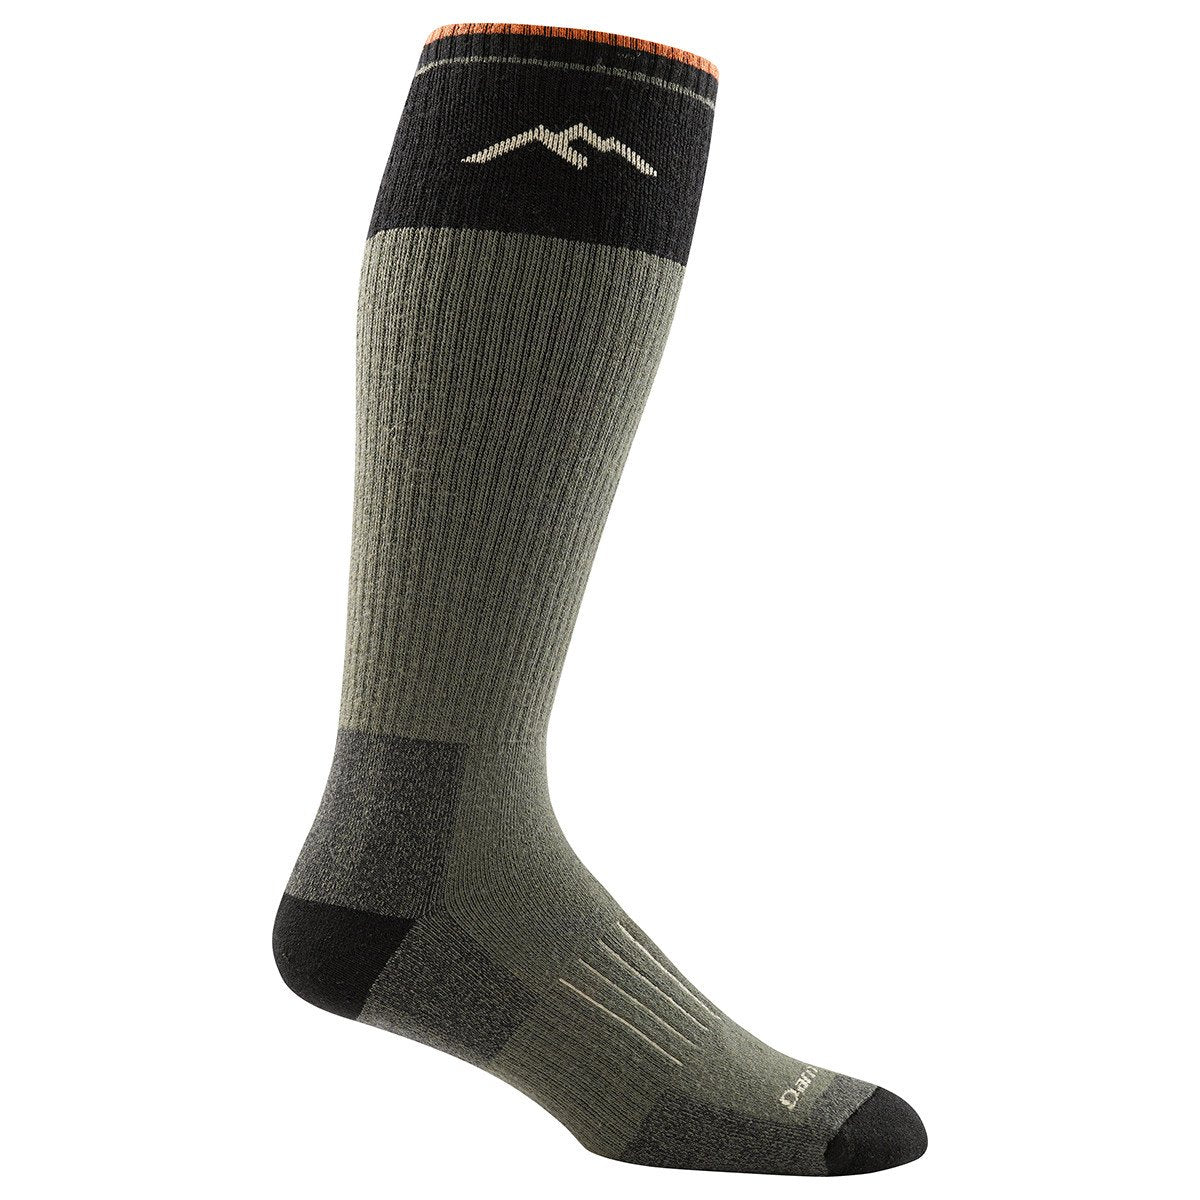 Darn Tough 2013 Men's Over-the-Calf Heavyweight Hunting Sock in Forest by GOHUNT | Darn Tough Vermont - GOHUNT Shop